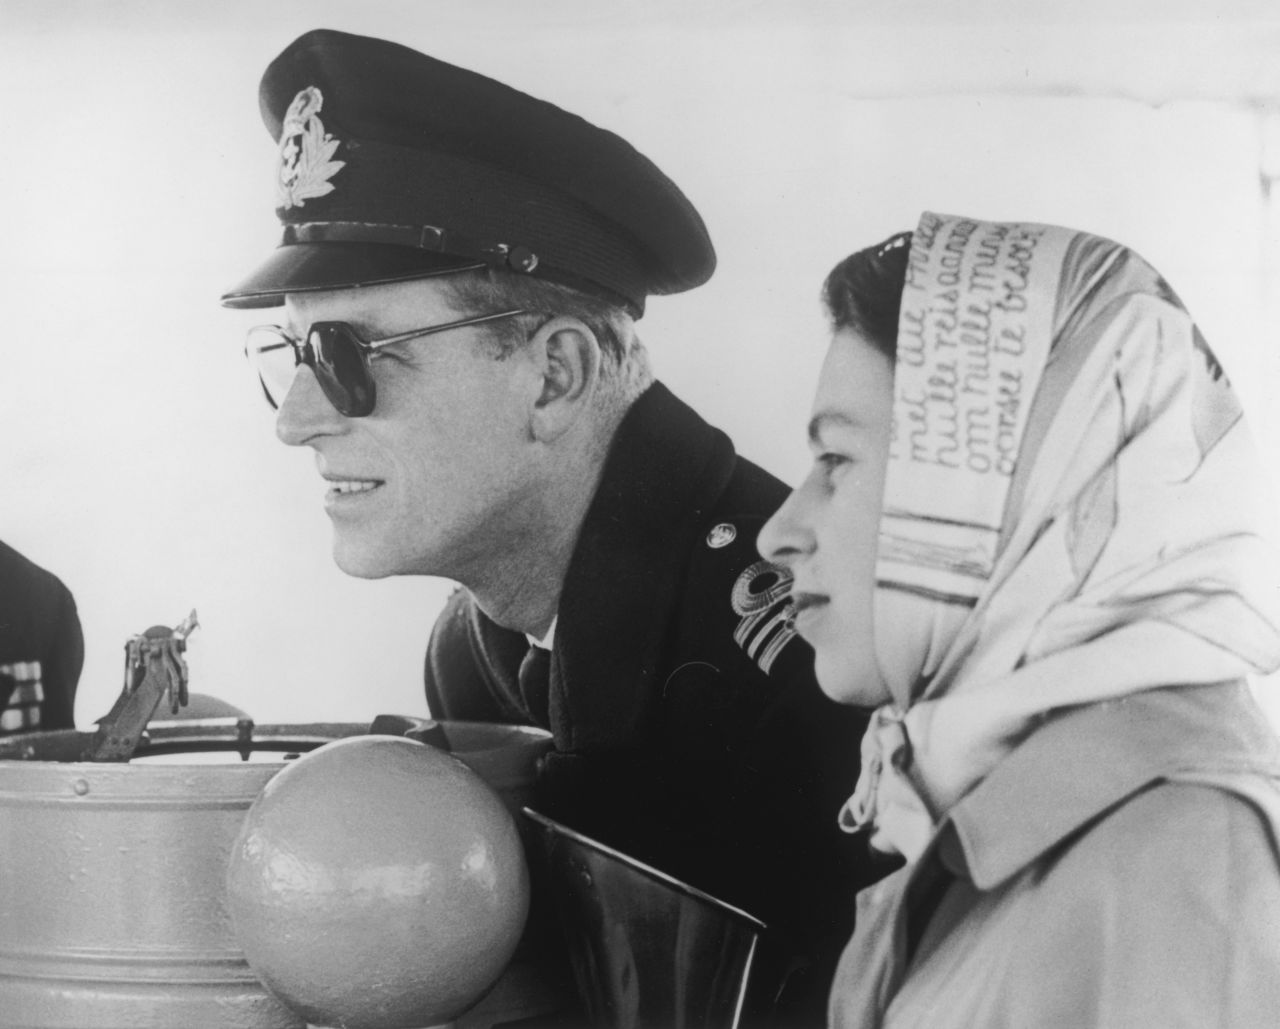 Queen Elizabeth II and Prince Philip are pictured on board the destroyer Crusader on February 6, 1952, the day her father died.